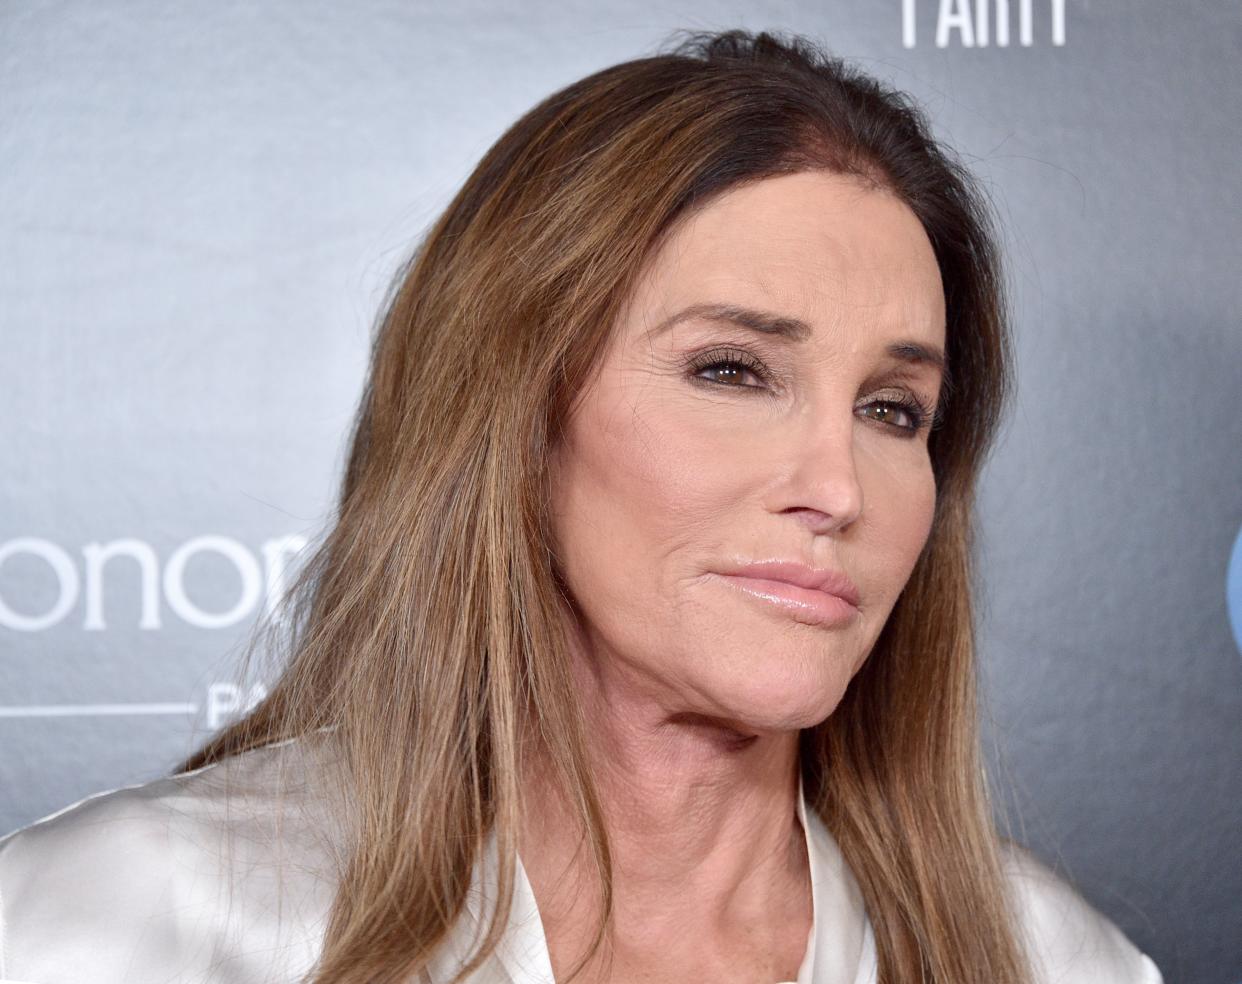 <p>Caitlyn Jenner attends the 60th Anniversary party for the Monte-Carlo TV Festival at Sunset Tower Hotel on February 05, 2020 in West Hollywood, California</p> (Photo by Gregg DeGuire/Getty Images)